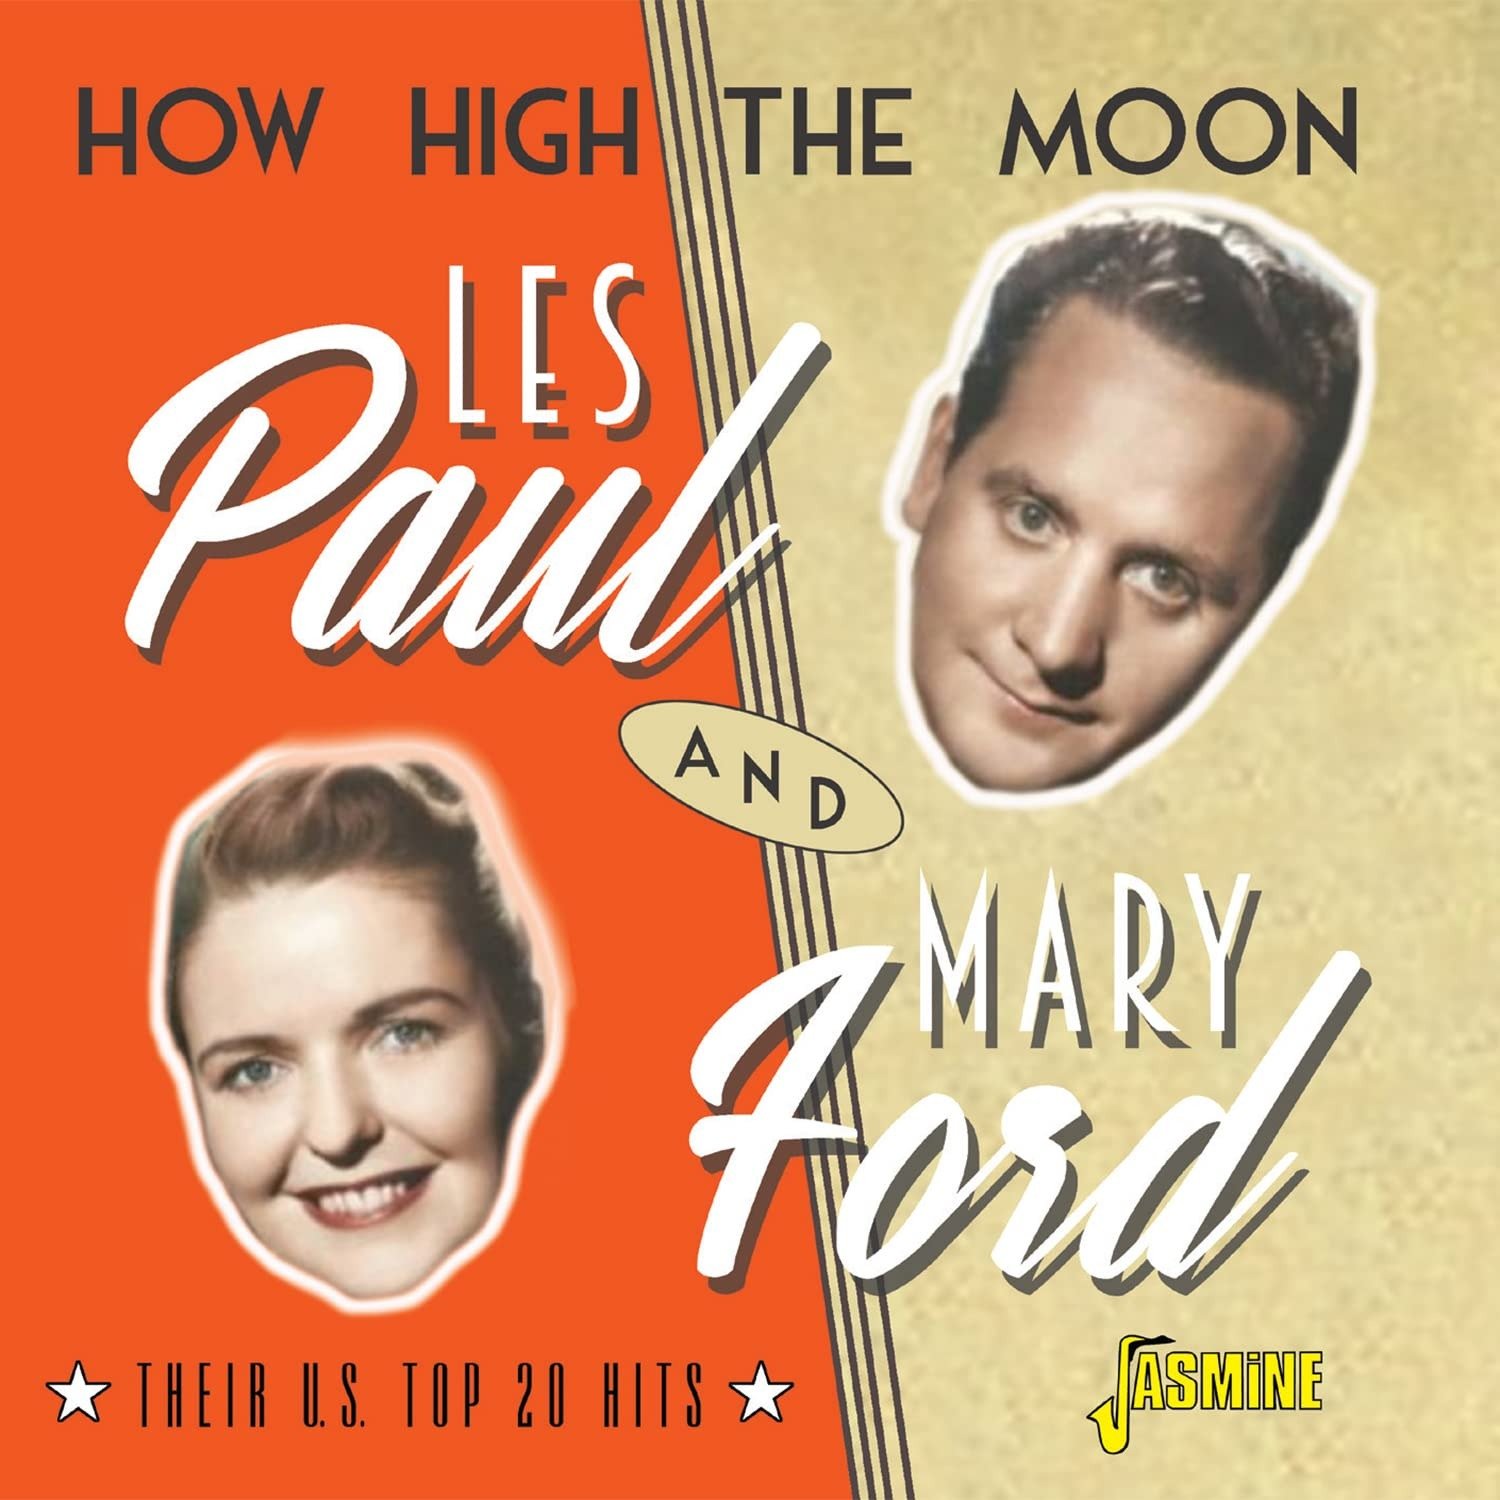 CD Shop - PAUL, LES & MARY FORD HOW HIGH THE MOON - THEIR U.S. TOP 20 HITS